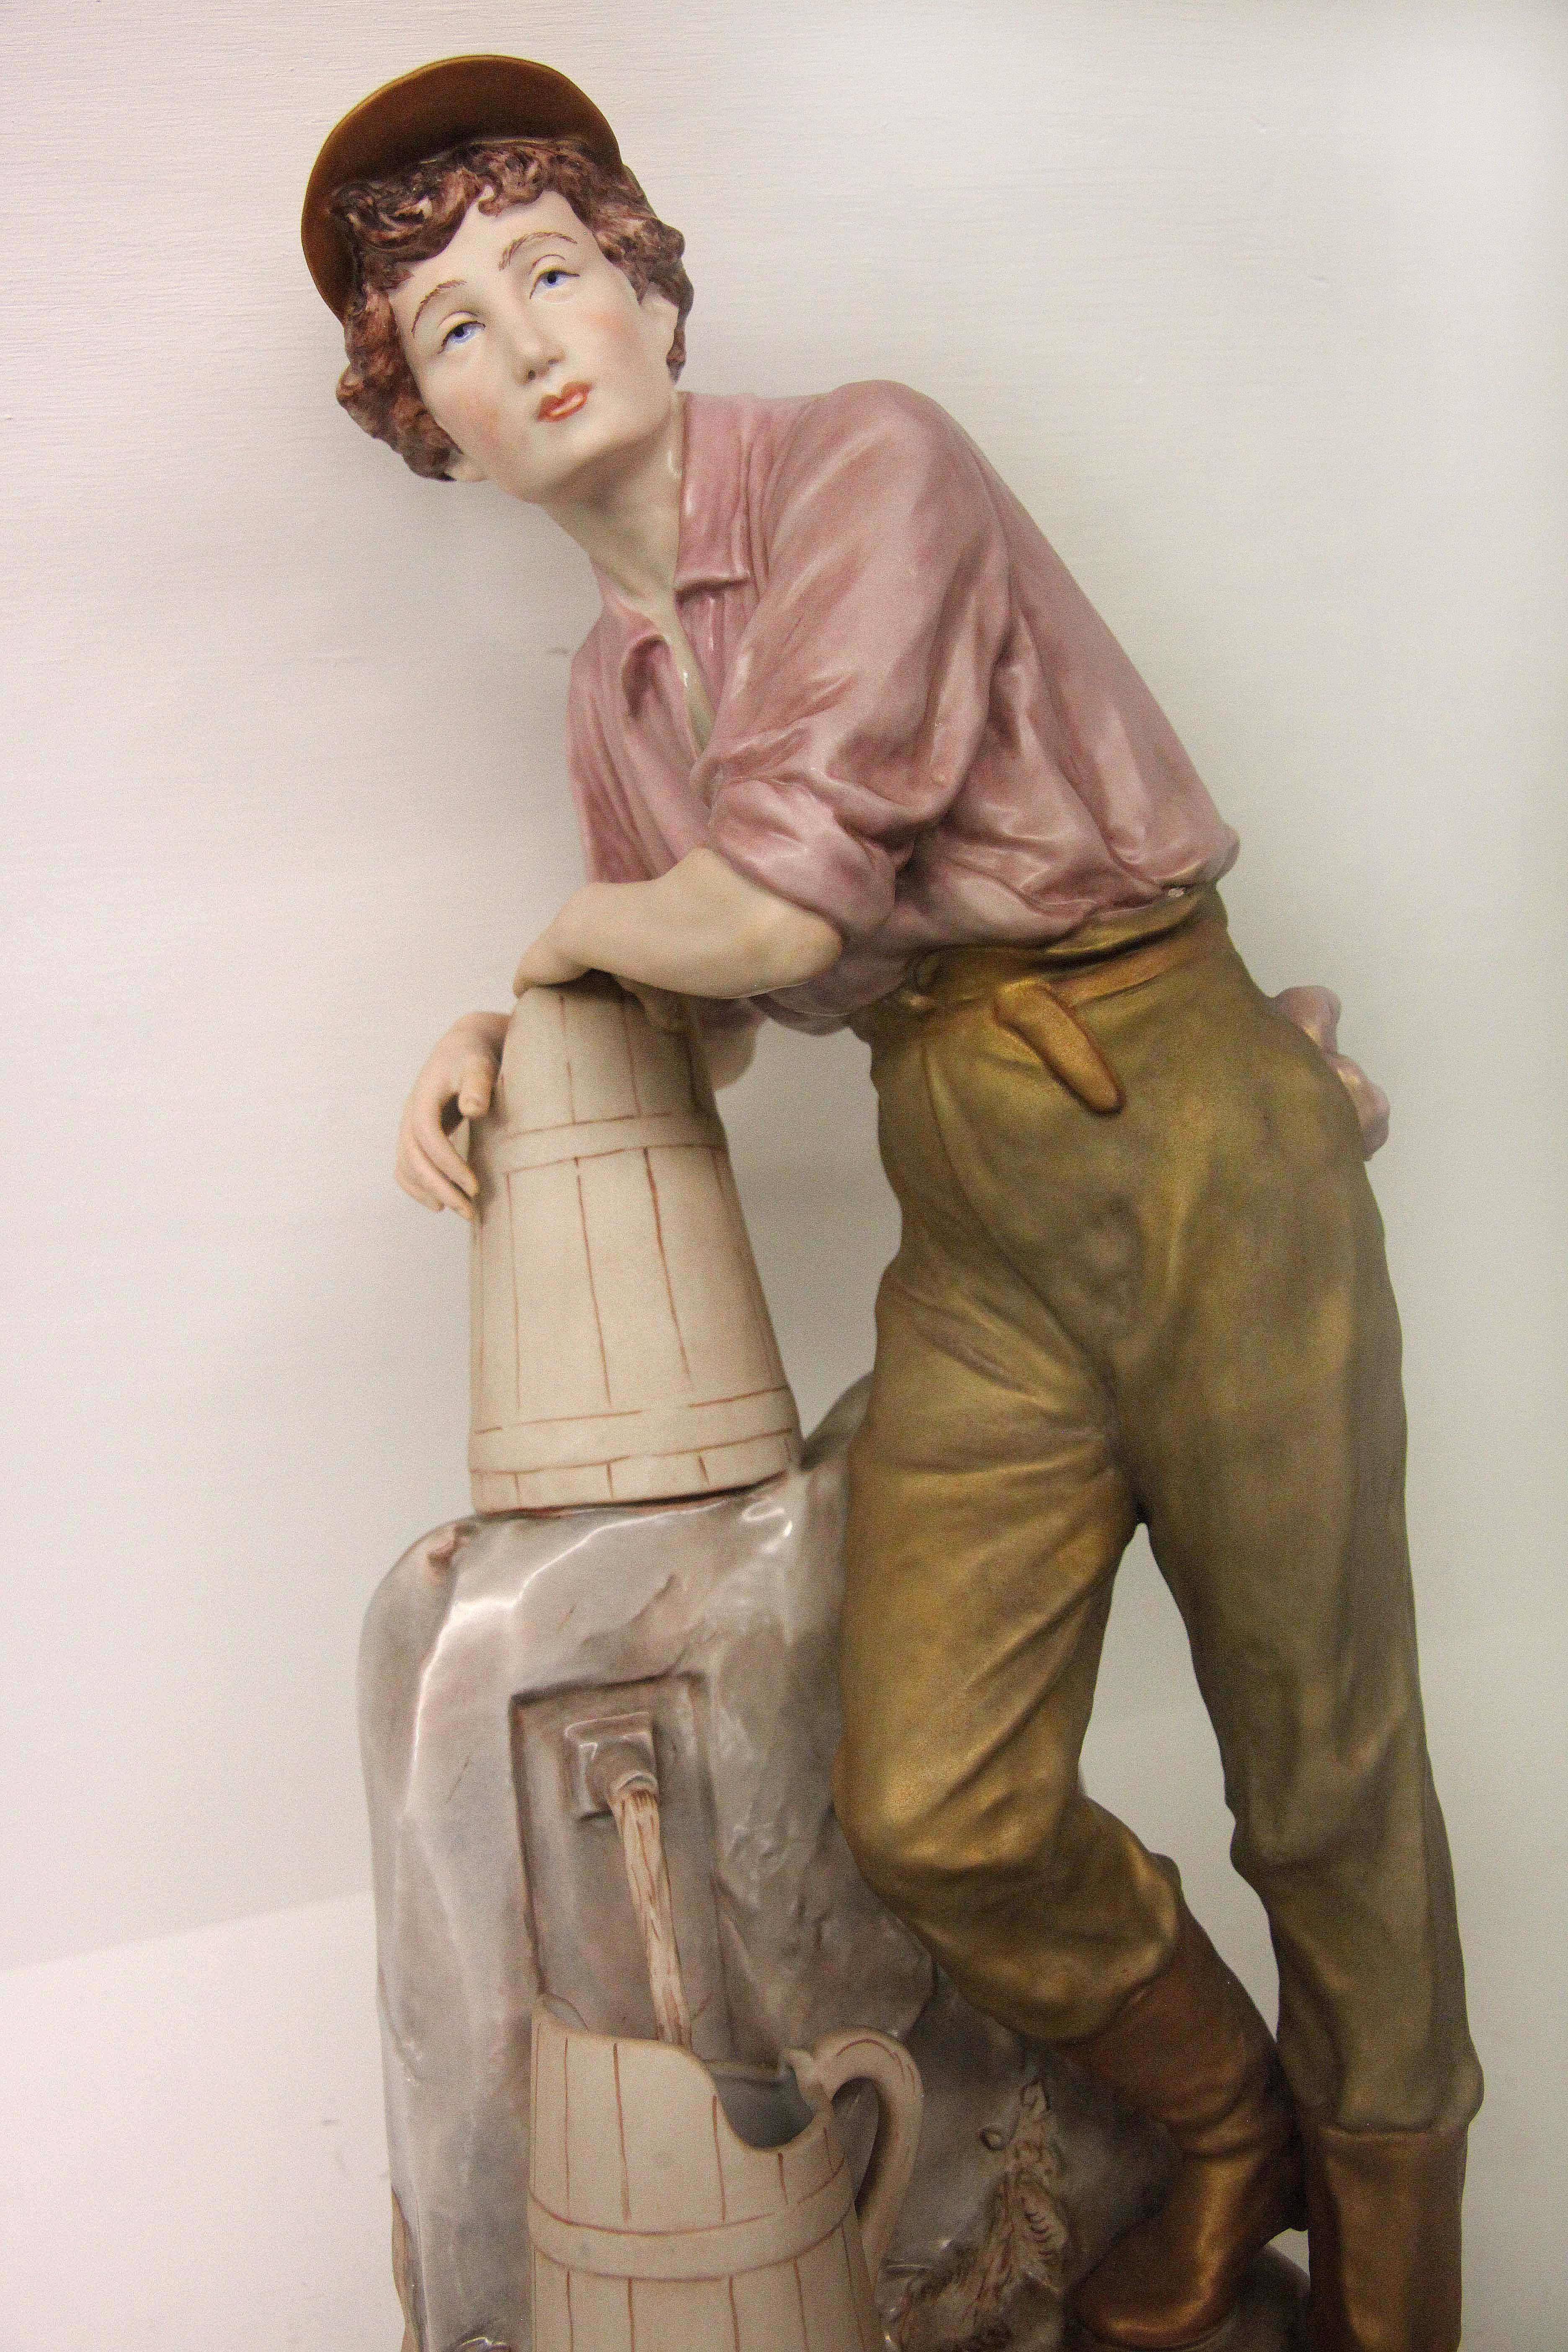 Royal Dux pheasant boy figurine, early 20th century, standing at the well filling jugs with water.